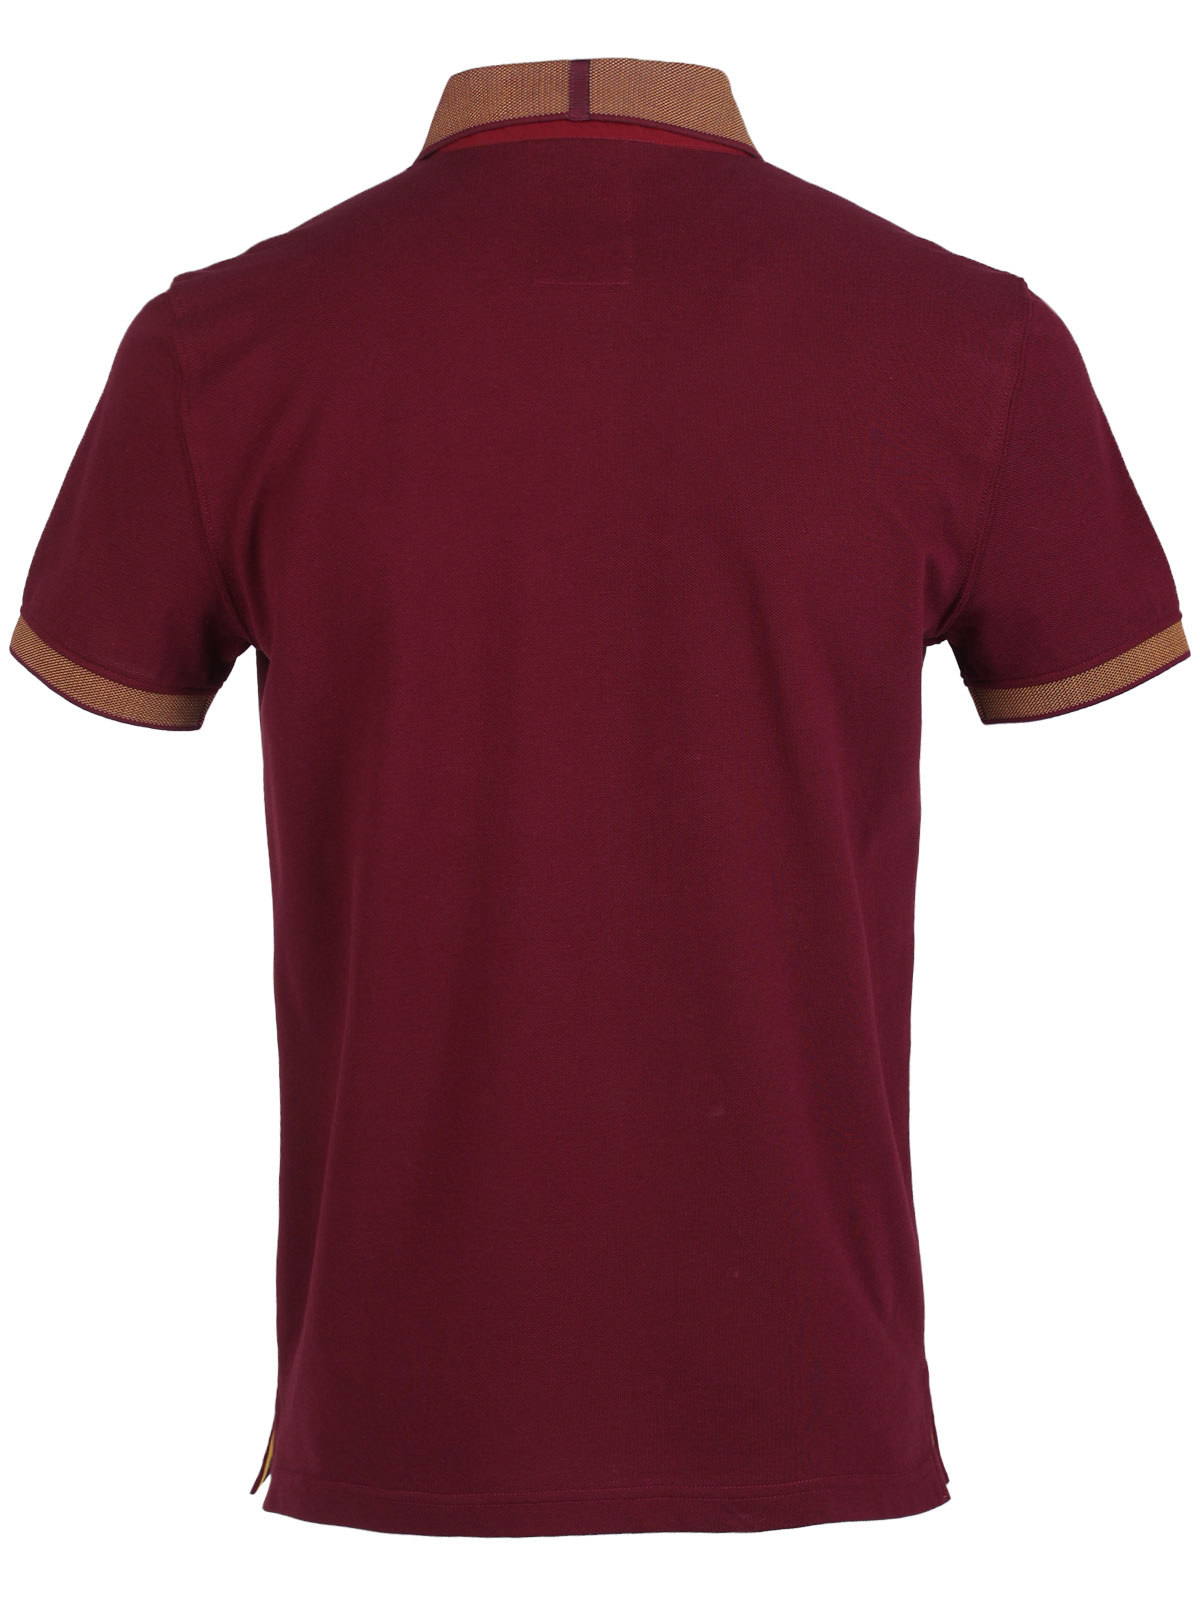 Blouse in burgundy with a yellow collar - 93438 € 38.81 img2